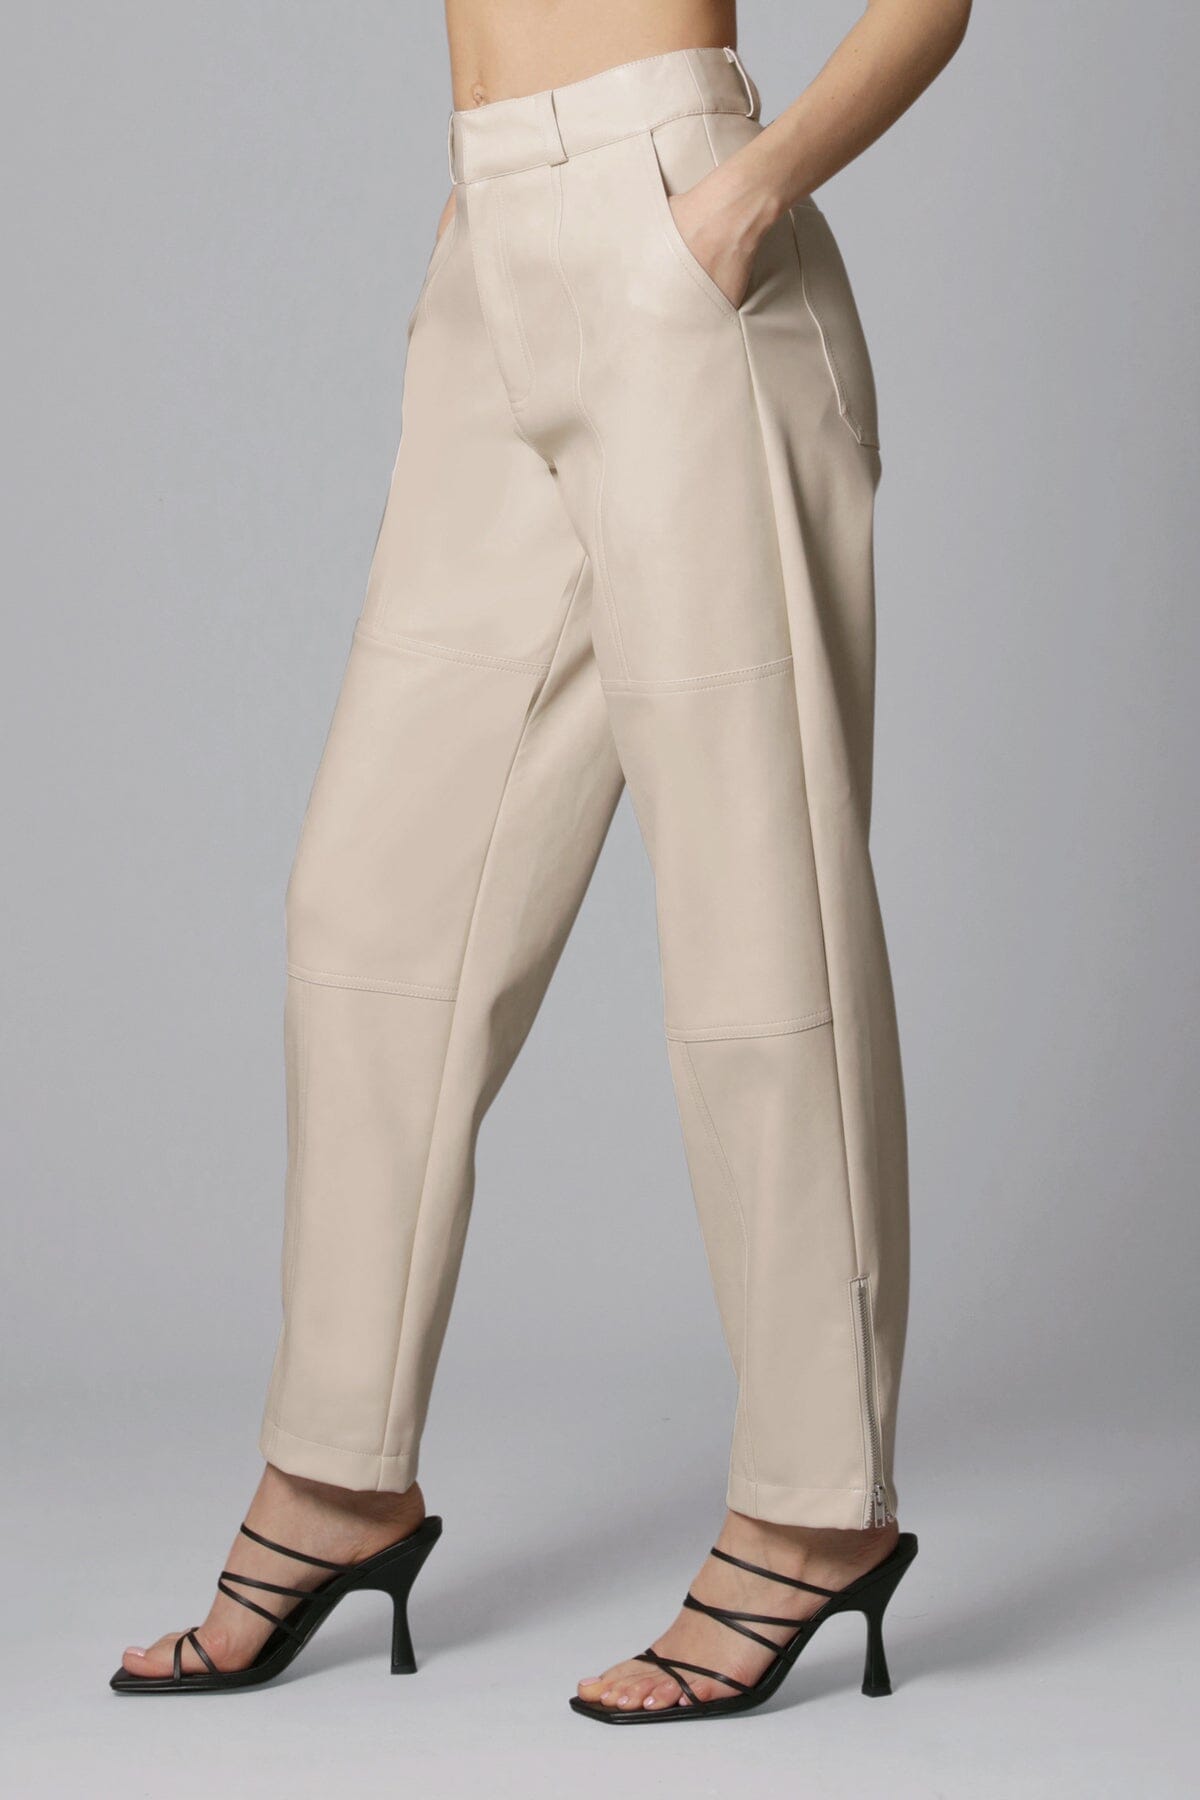 bone beige off white faux ever leather tapered pant - figure flattering day to night pants for women